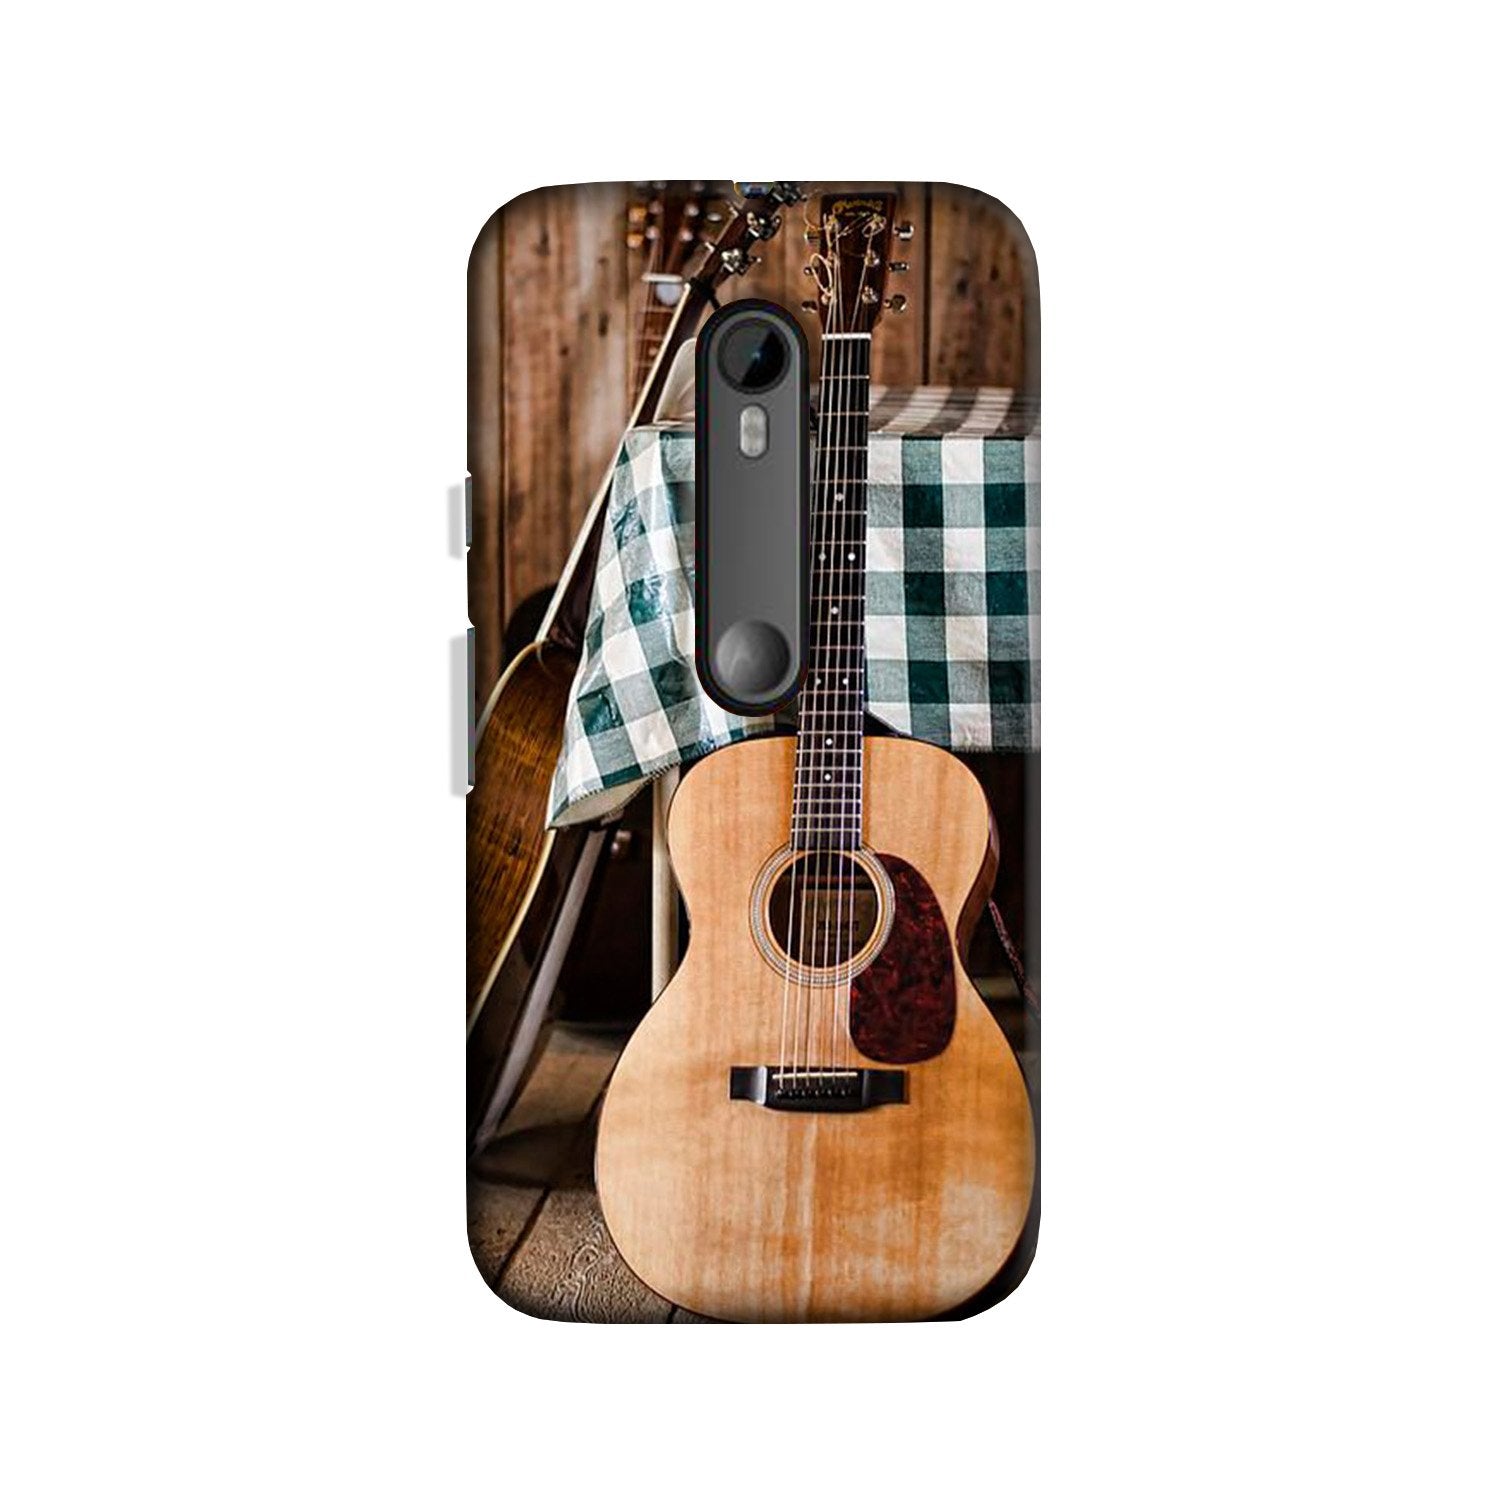 Guitar2 Case for Moto X Force